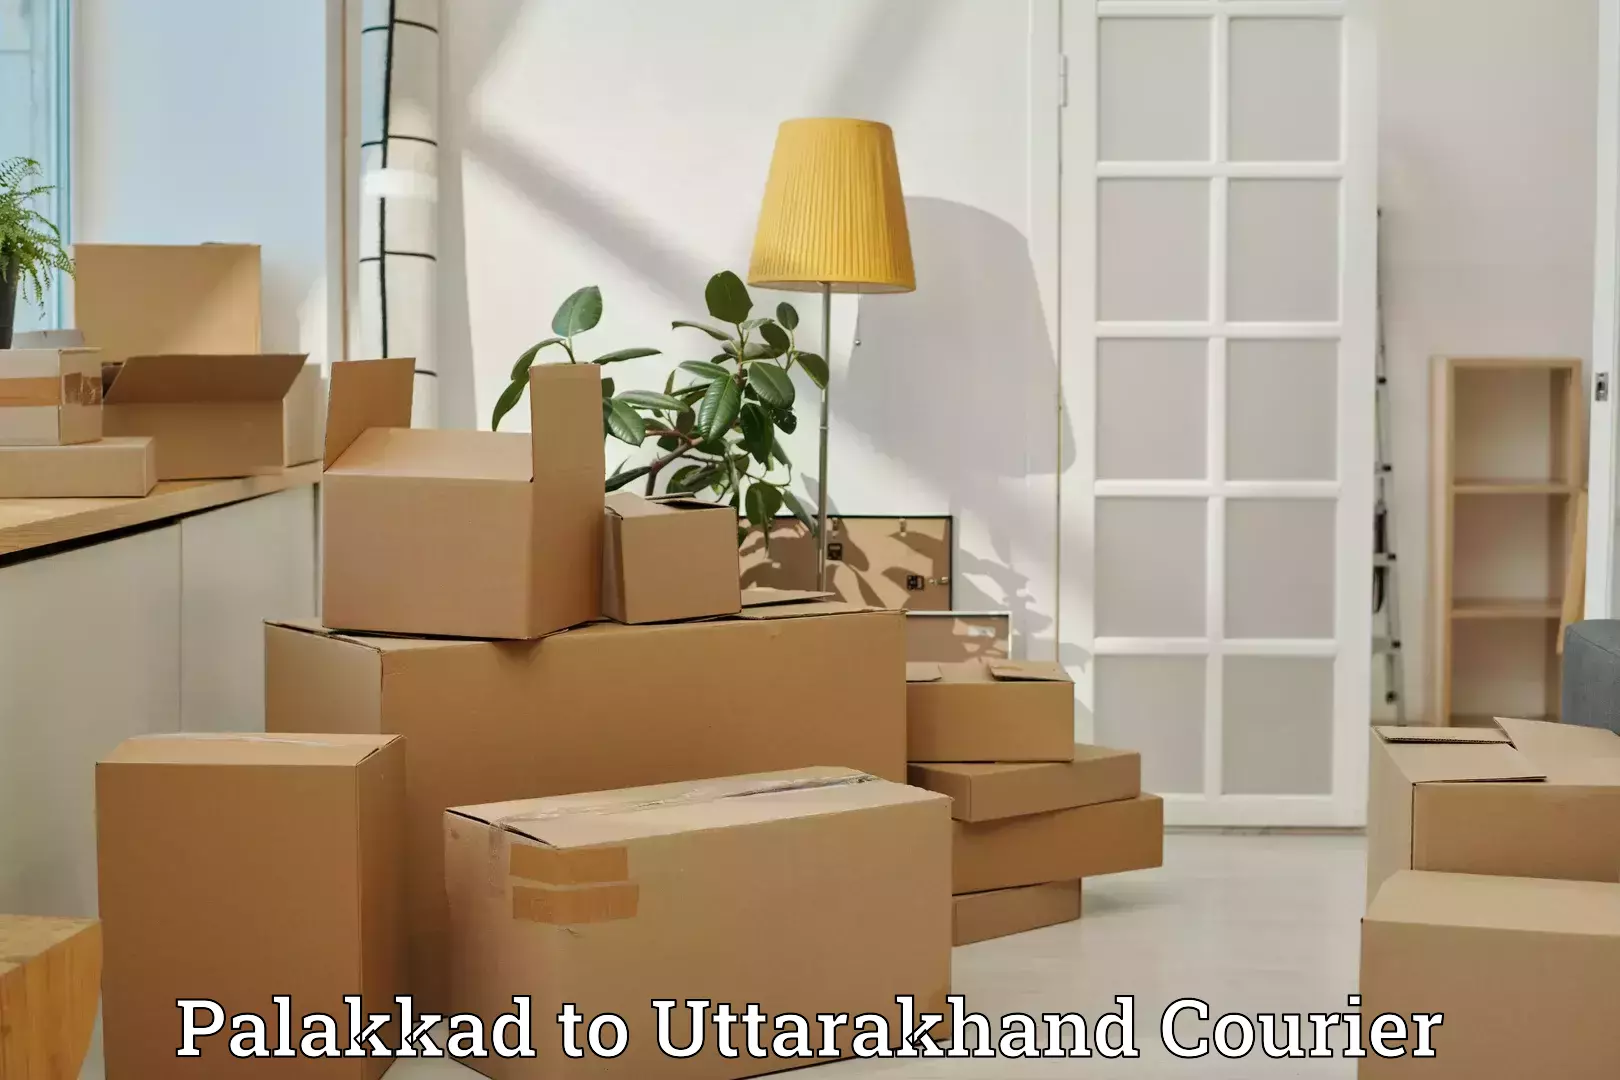 Luggage delivery network Palakkad to Rudrapur